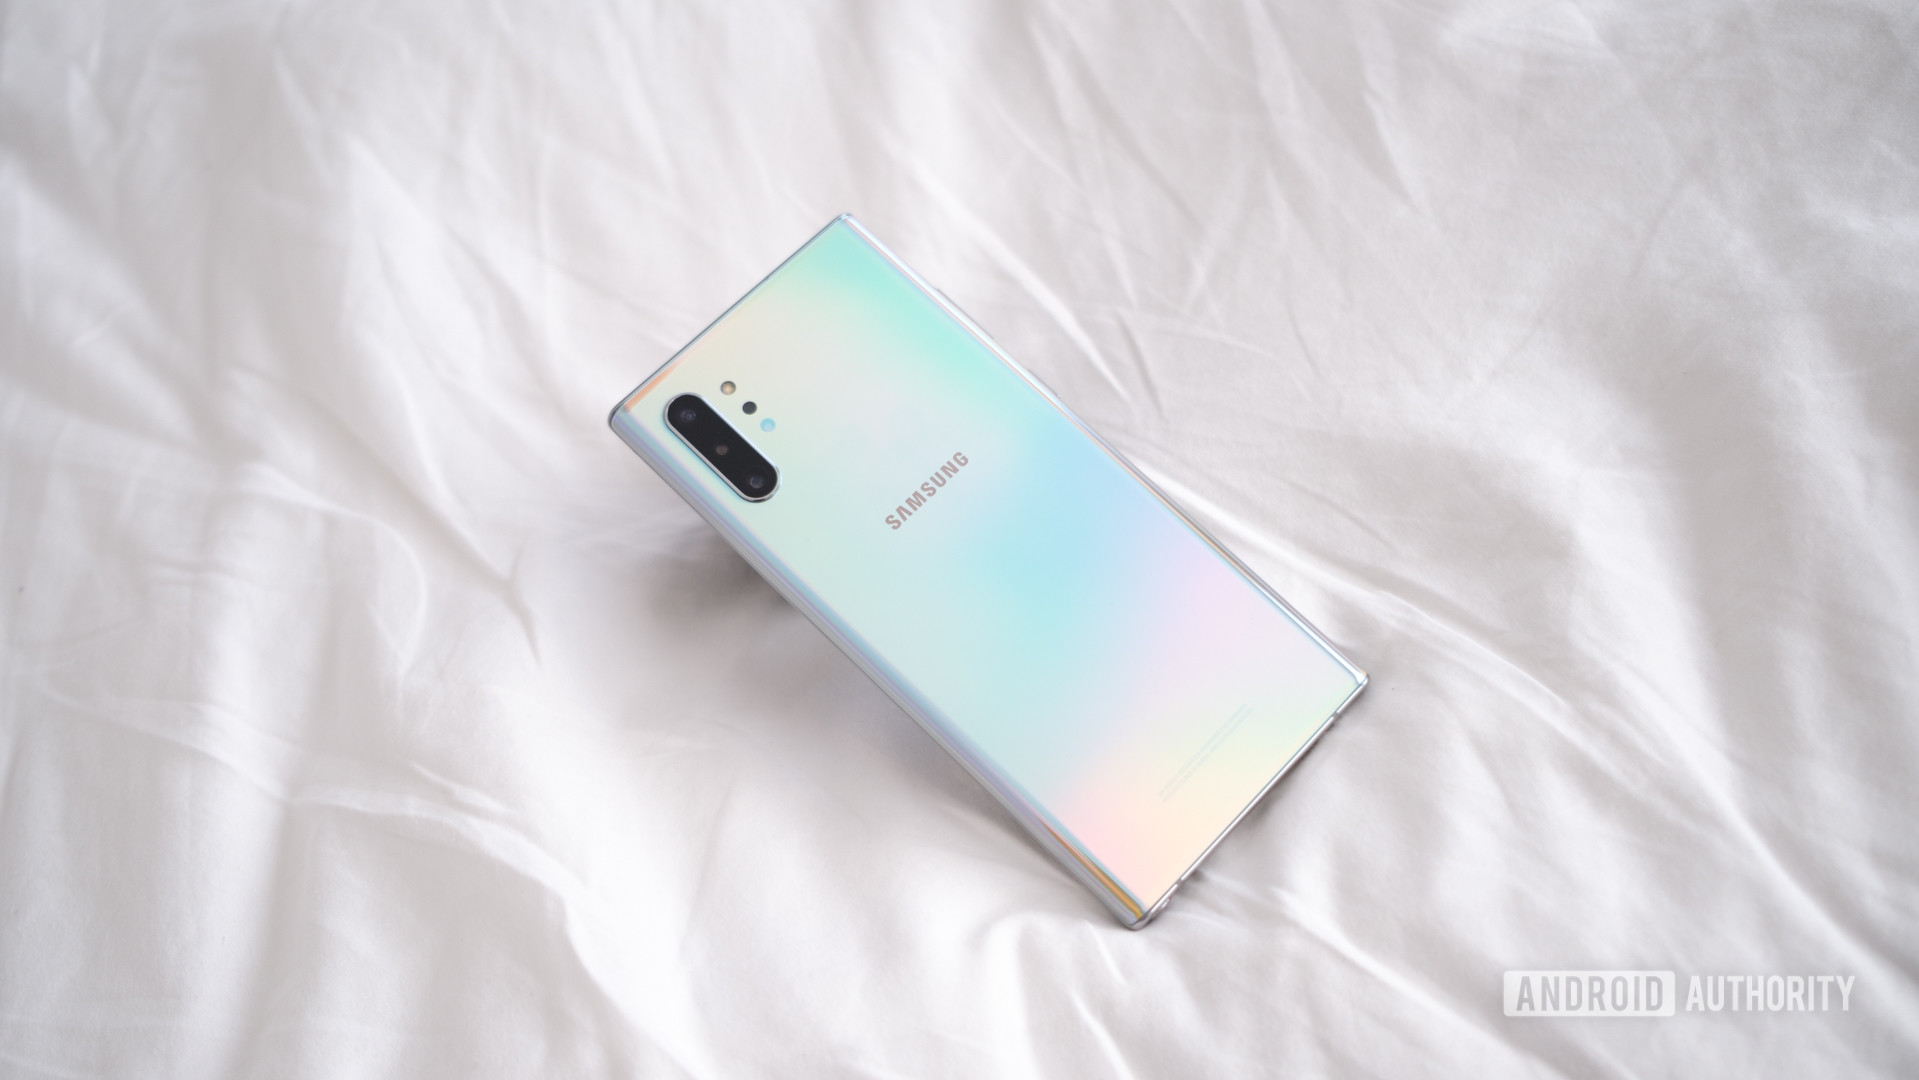 Samsung Galaxy Note 10 Plus back on bed face down